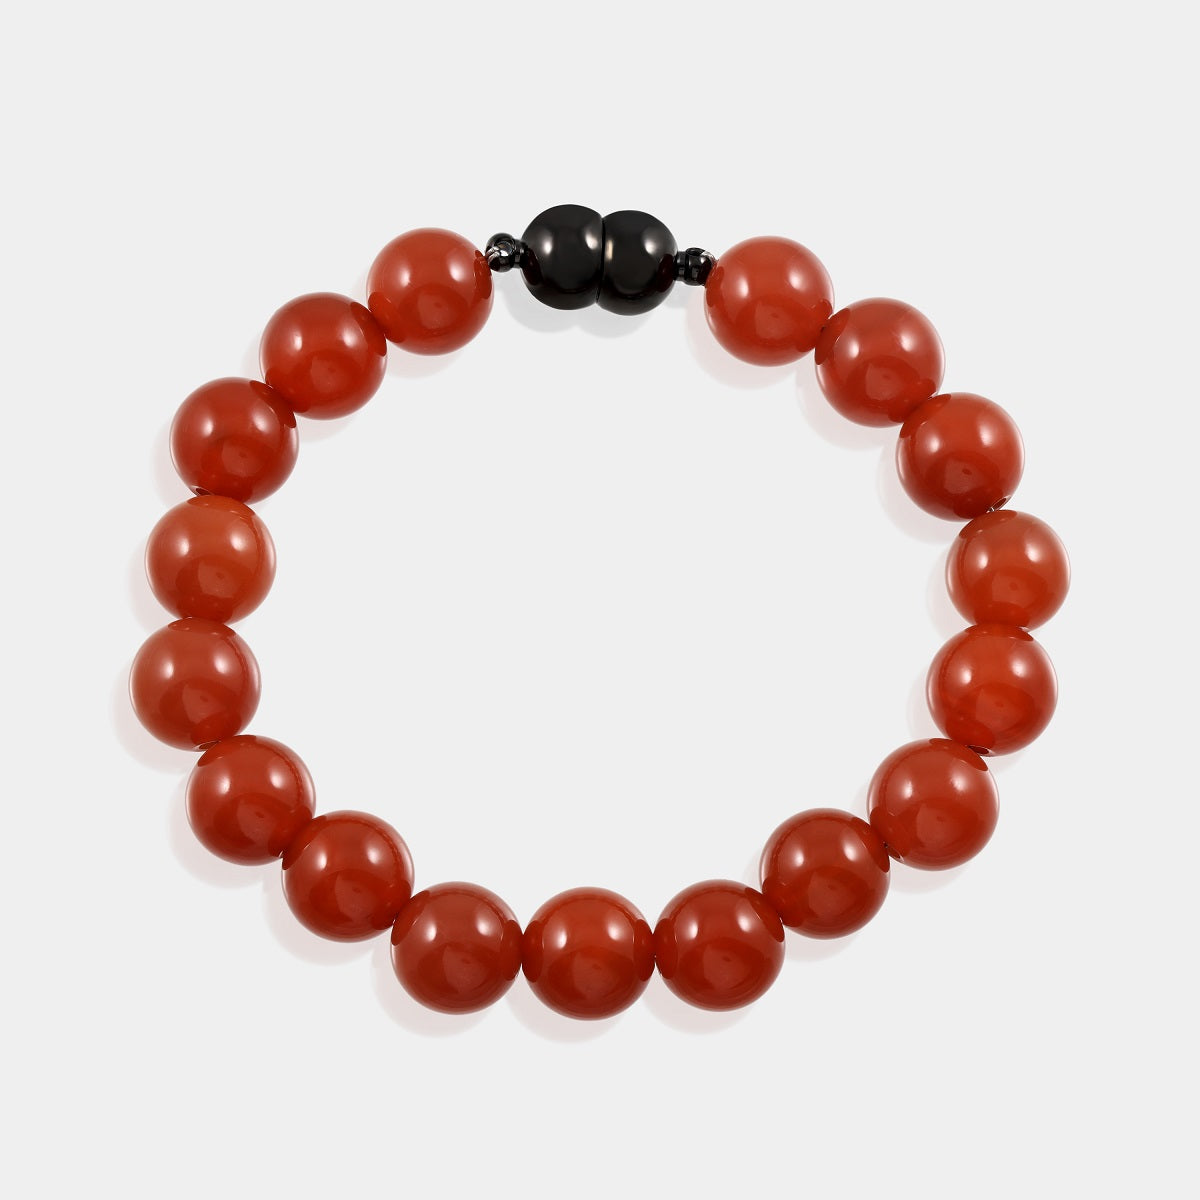 A detailed shot of the magnetic lock mechanism on the red onyx gemstone bracelet, highlighting its functional design with brass accents.